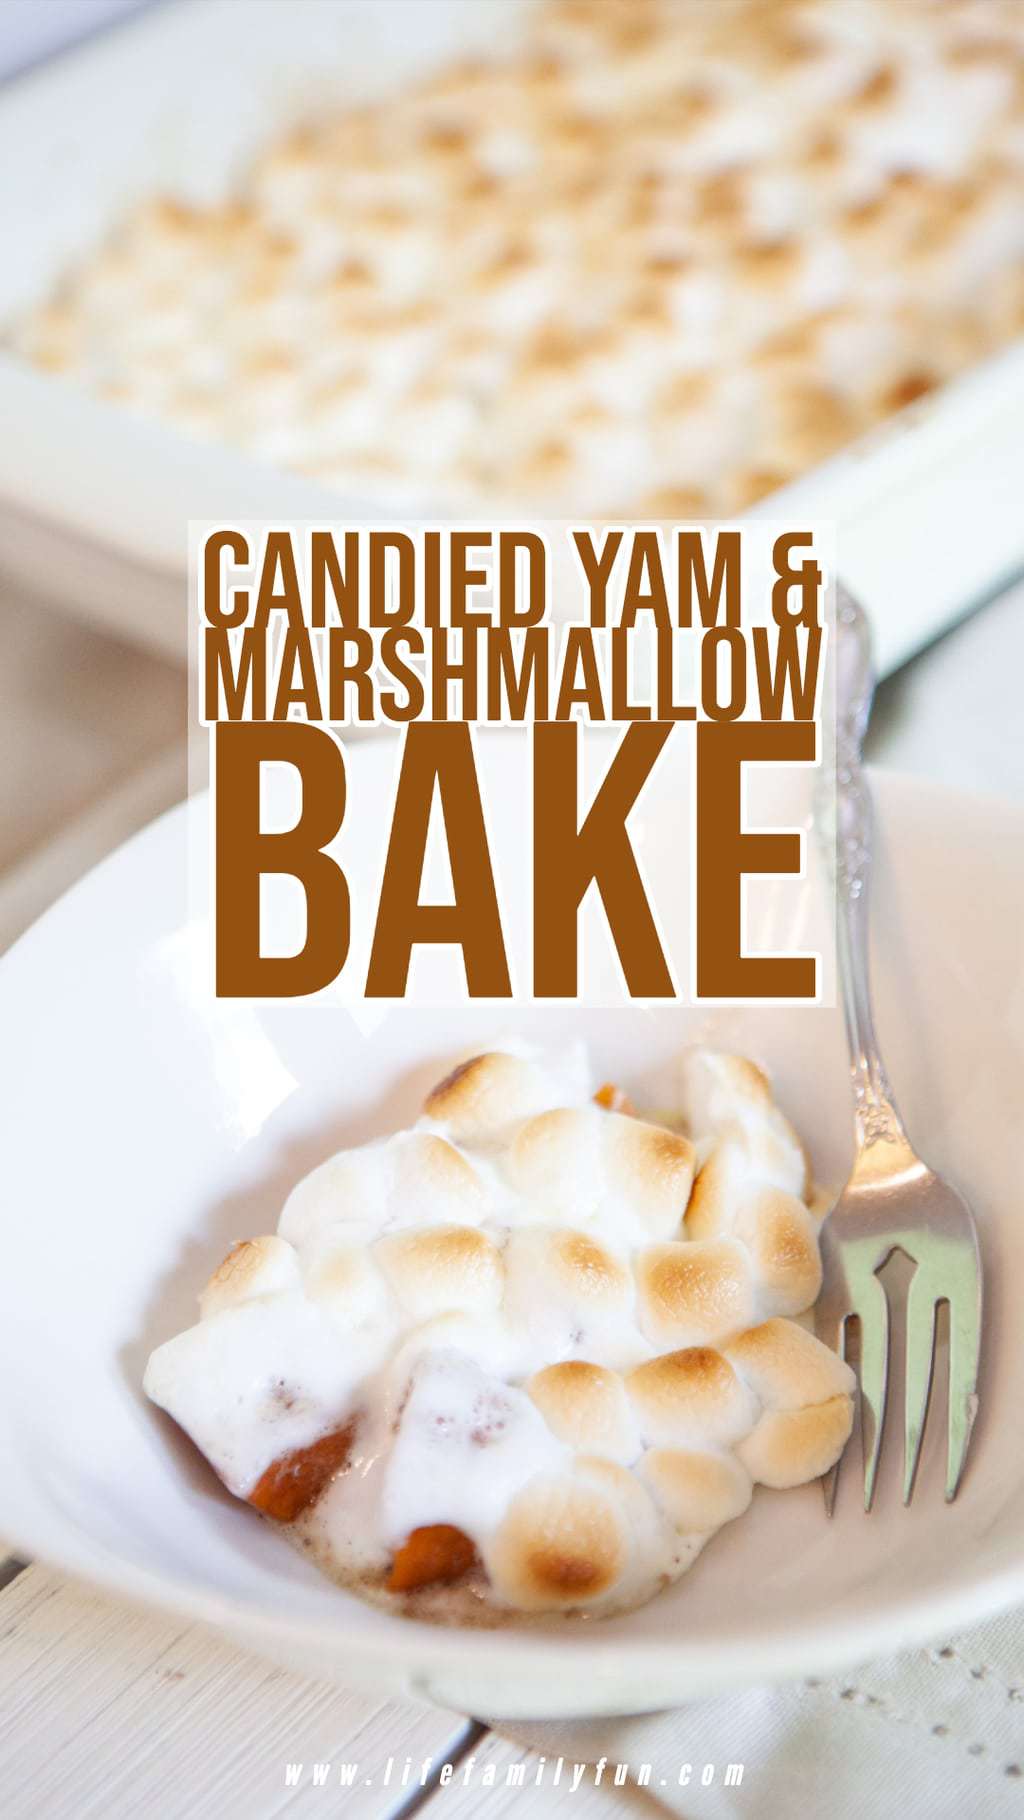 Candied yam and marshmallow bake